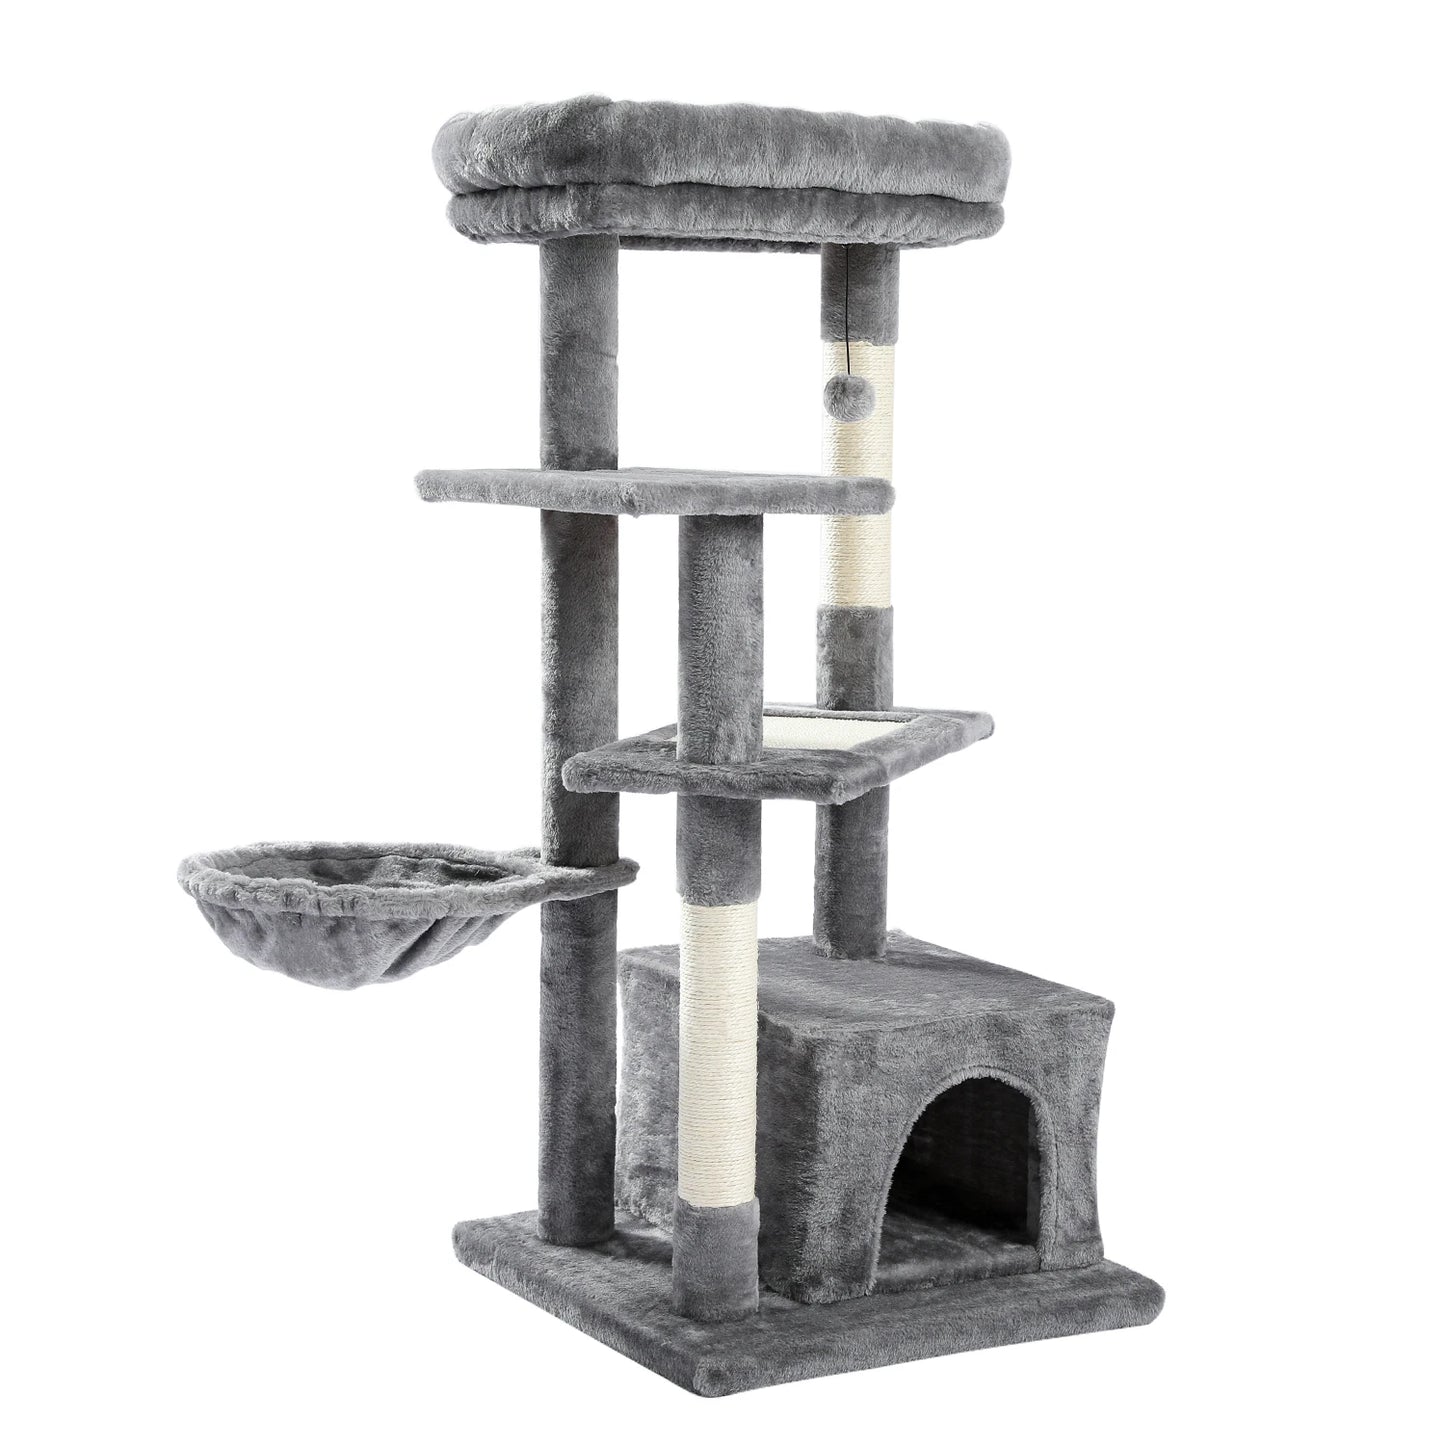 Gray cat tree with a niche and two baskets